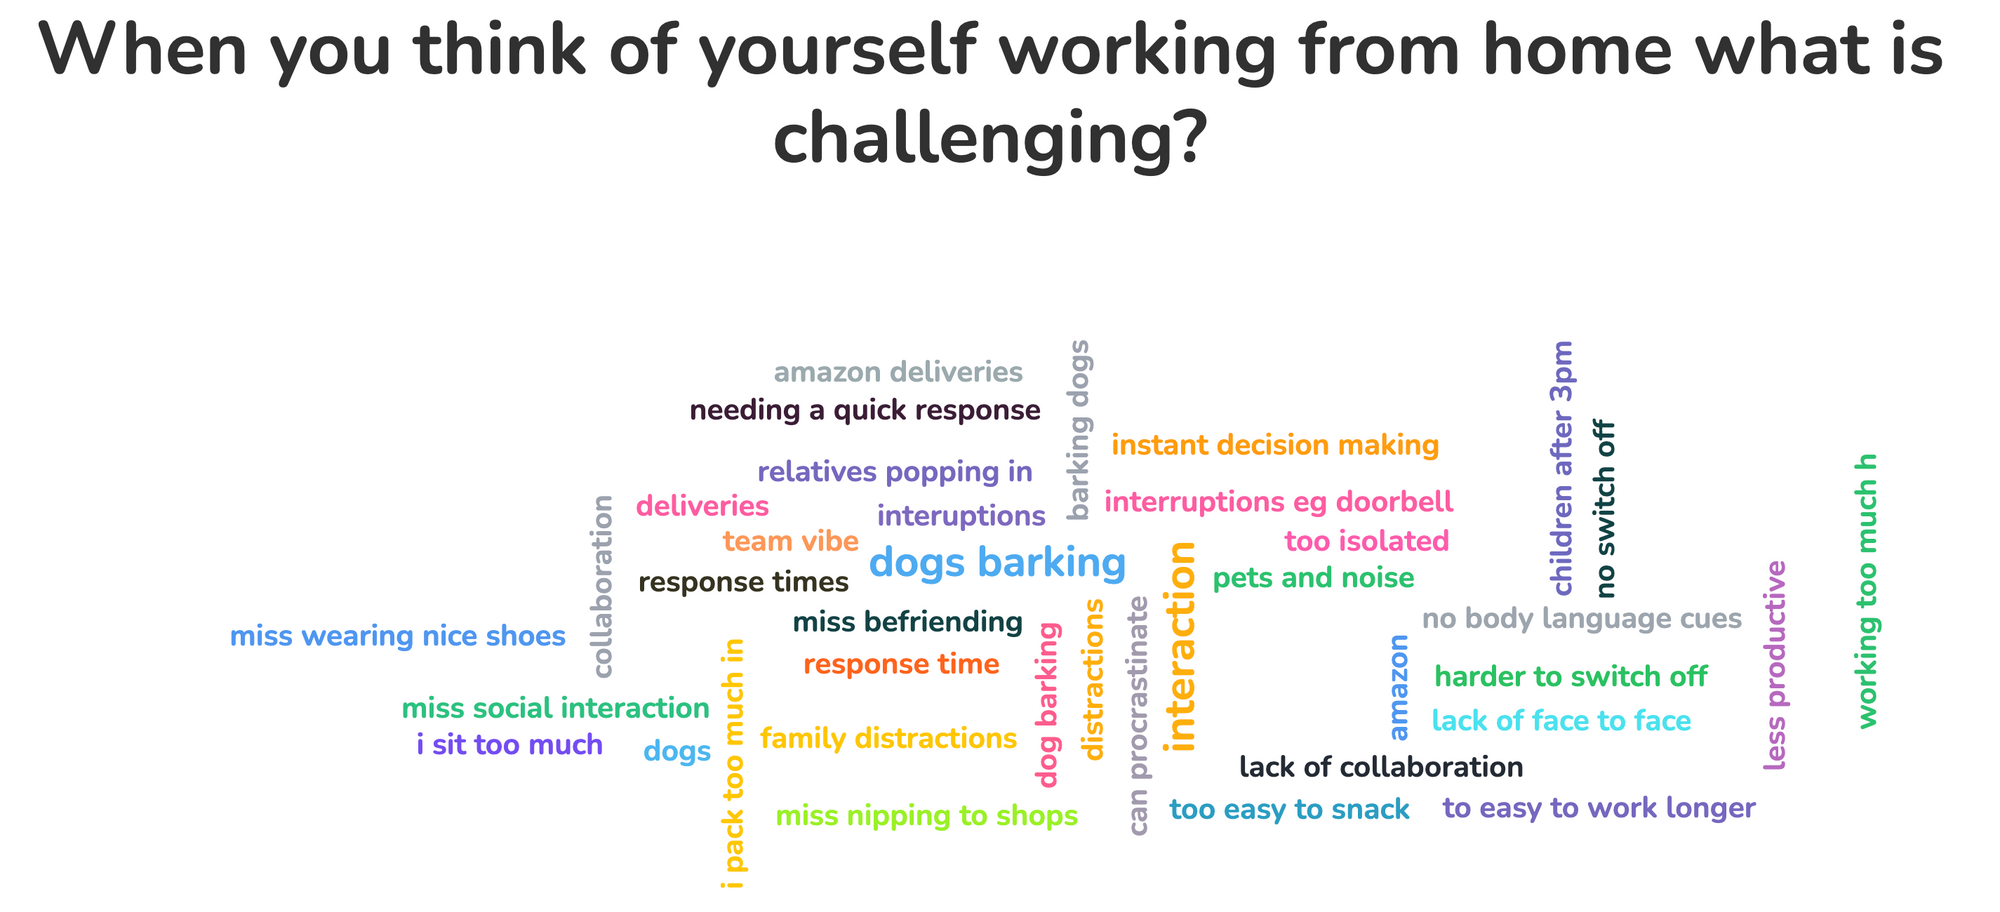 Pets and noise, Dogs barking, interruptions eg doorbell, Dogs barking, Relatives popping in, Miss befriending, Barking dogs, Amazon, I pack too much in, Miss social interaction, Dog barking, Interaction, Interuptions, lack of collaboration, No body language cues, Dogs, Instant decision, making Harder to switch off, Too isolated, Children after 3pm, Needing a quick response, Can procrastinate, I sit too much, Miss nipping to shops, Interaction, Too easy to snack, Team vibe, Less productive, Response times, Amazon deliveries, Lack of face to face, response time, Distractions, Working too much, Deliveries, To easy to work longer, No switch off, Collaboration, Miss wearing nice shoes, Family distractions